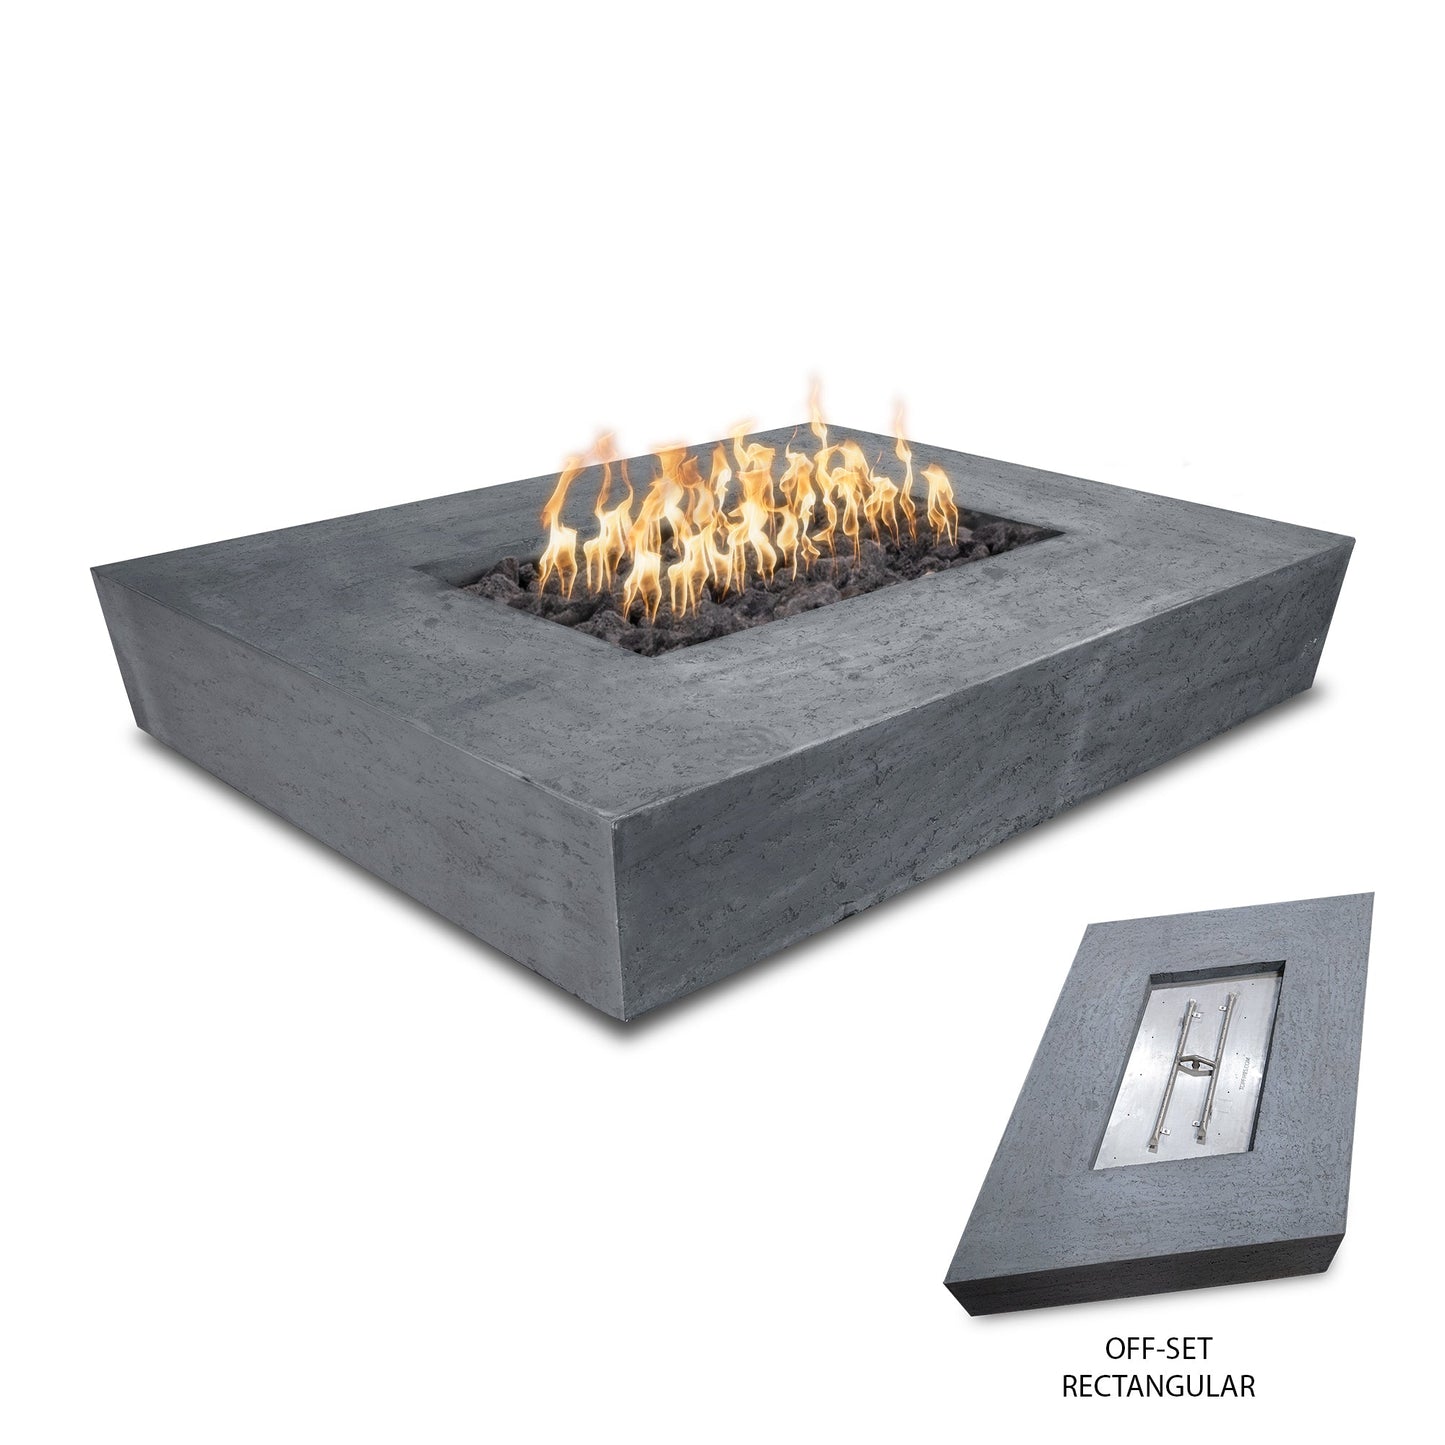 The Outdoor Plus Rectangular Heiko 58" Rustic White GFRC Concrete Liquid Propane Fire Pit with Match Lit with Flame Sense Ignition